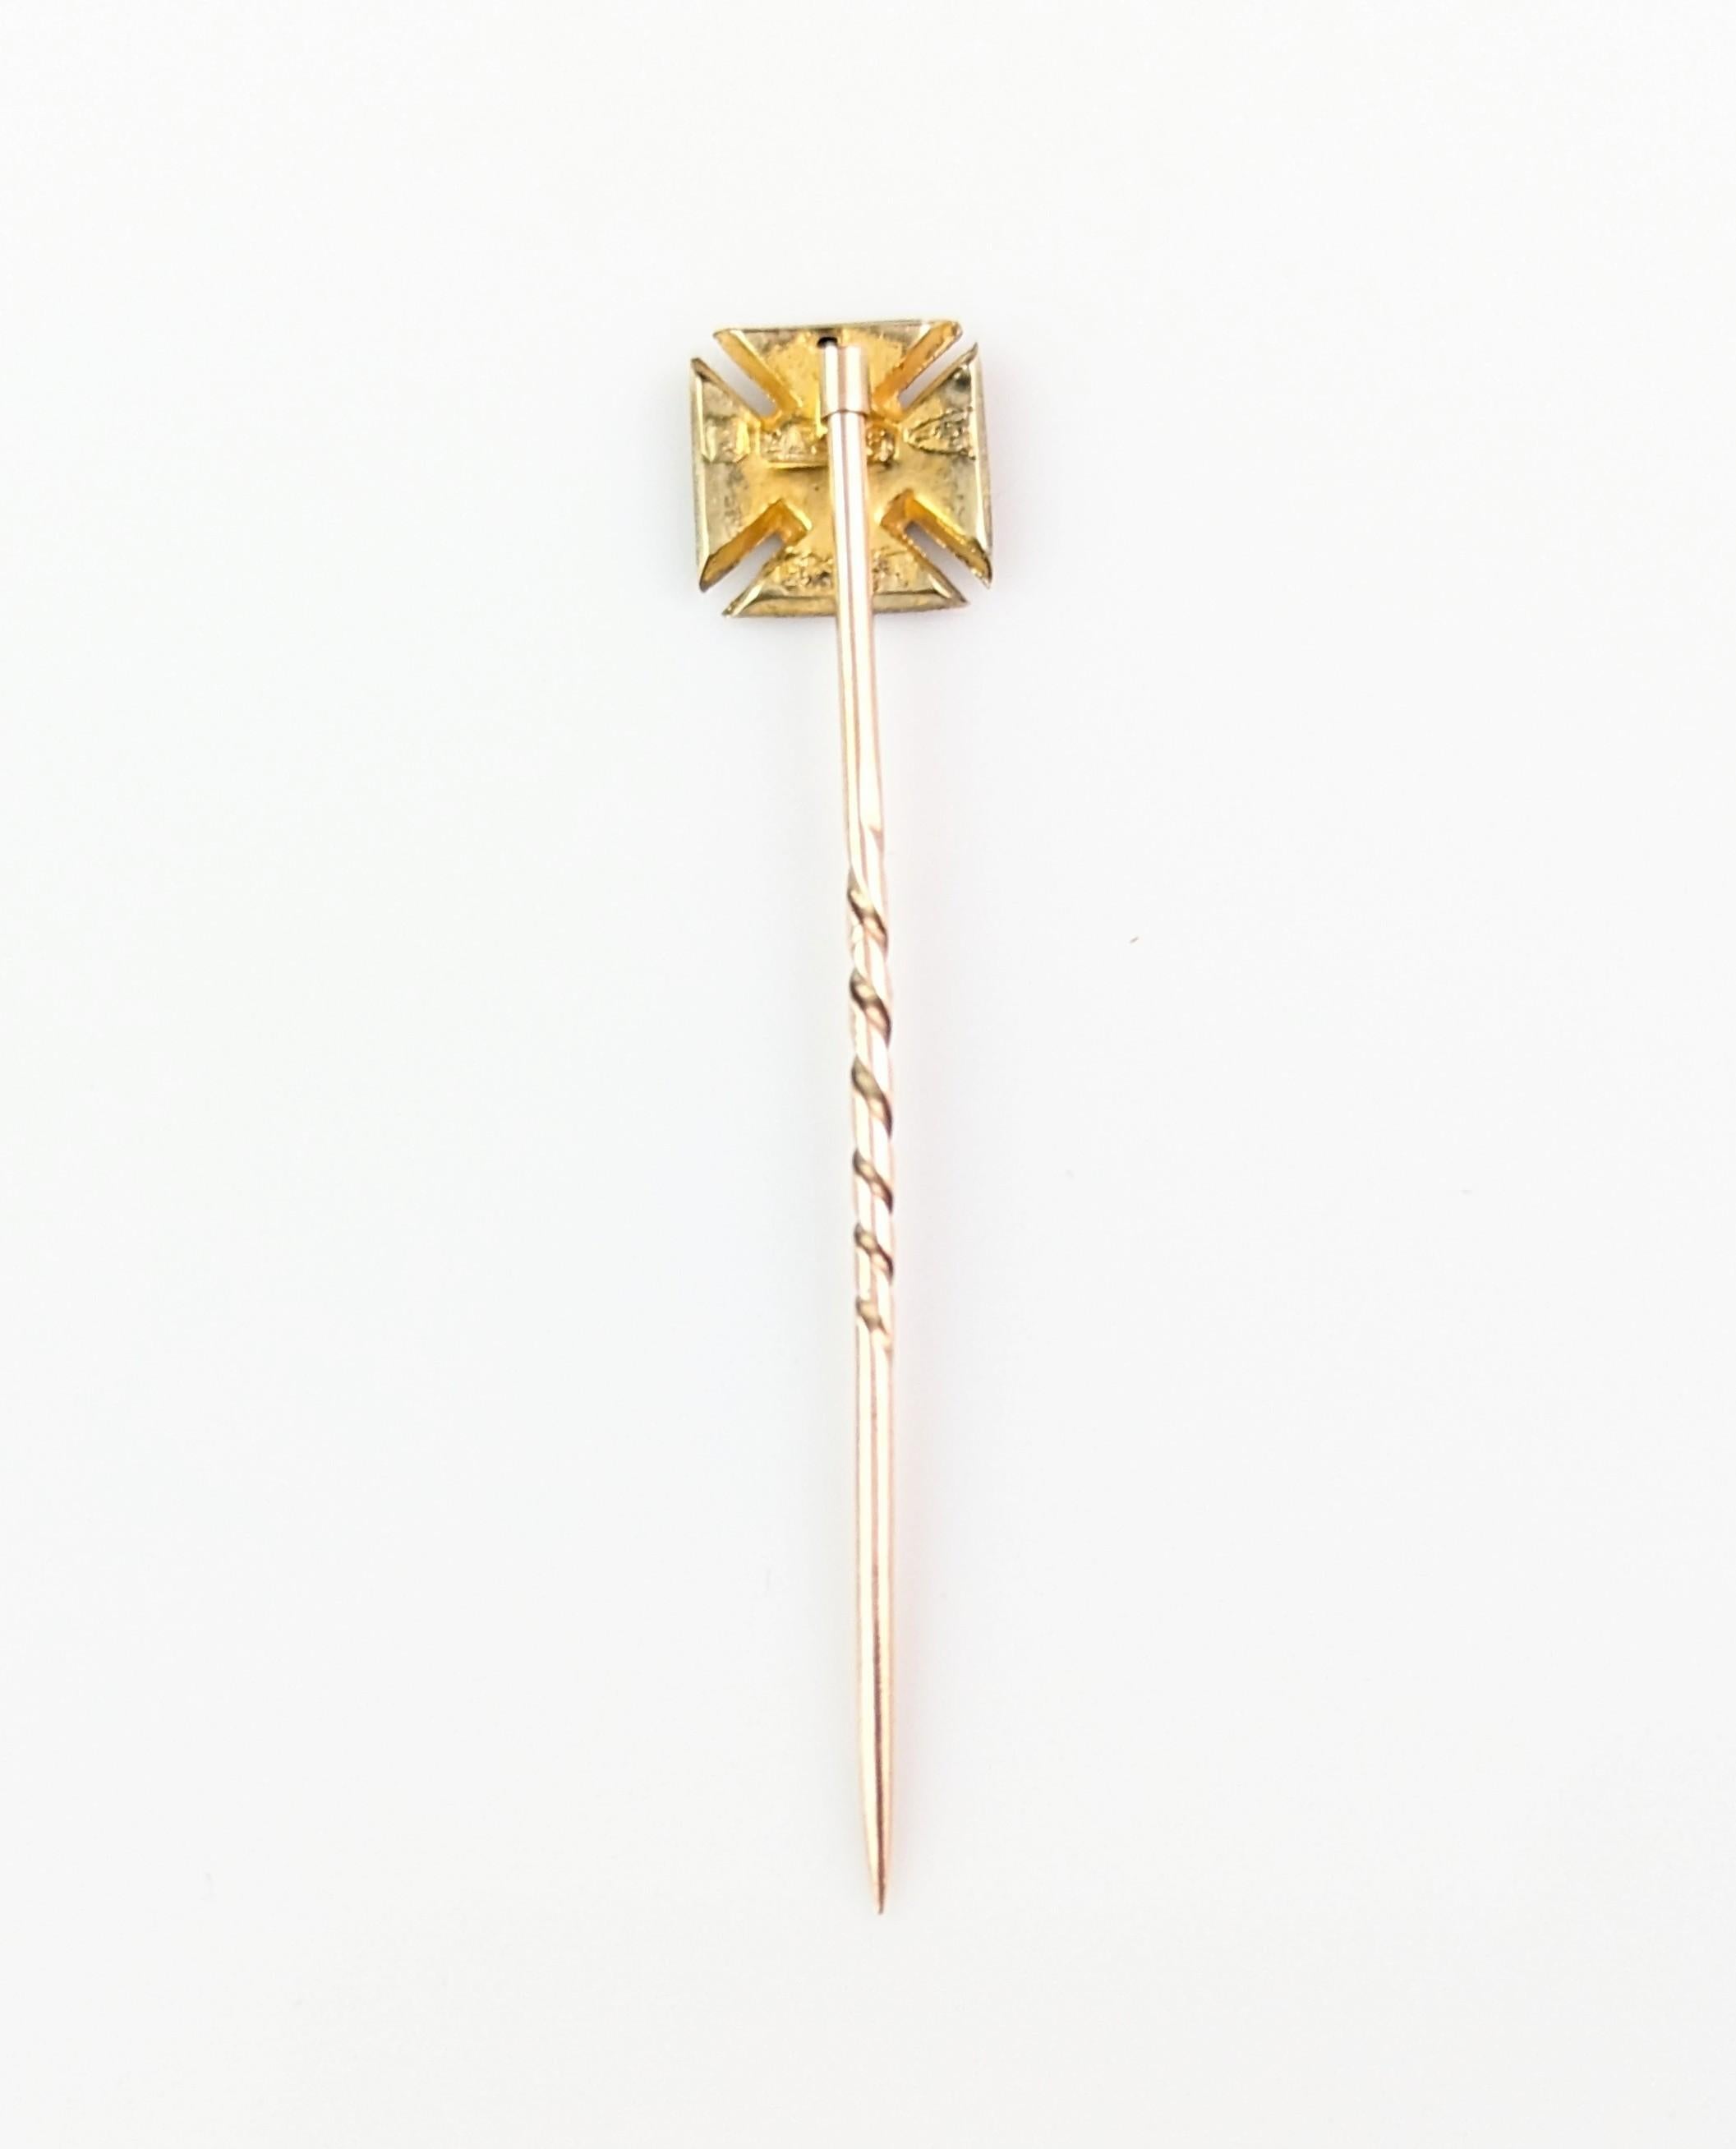 Vintage Art Deco 9k gold stick pin, Cross Pattee  For Sale 4